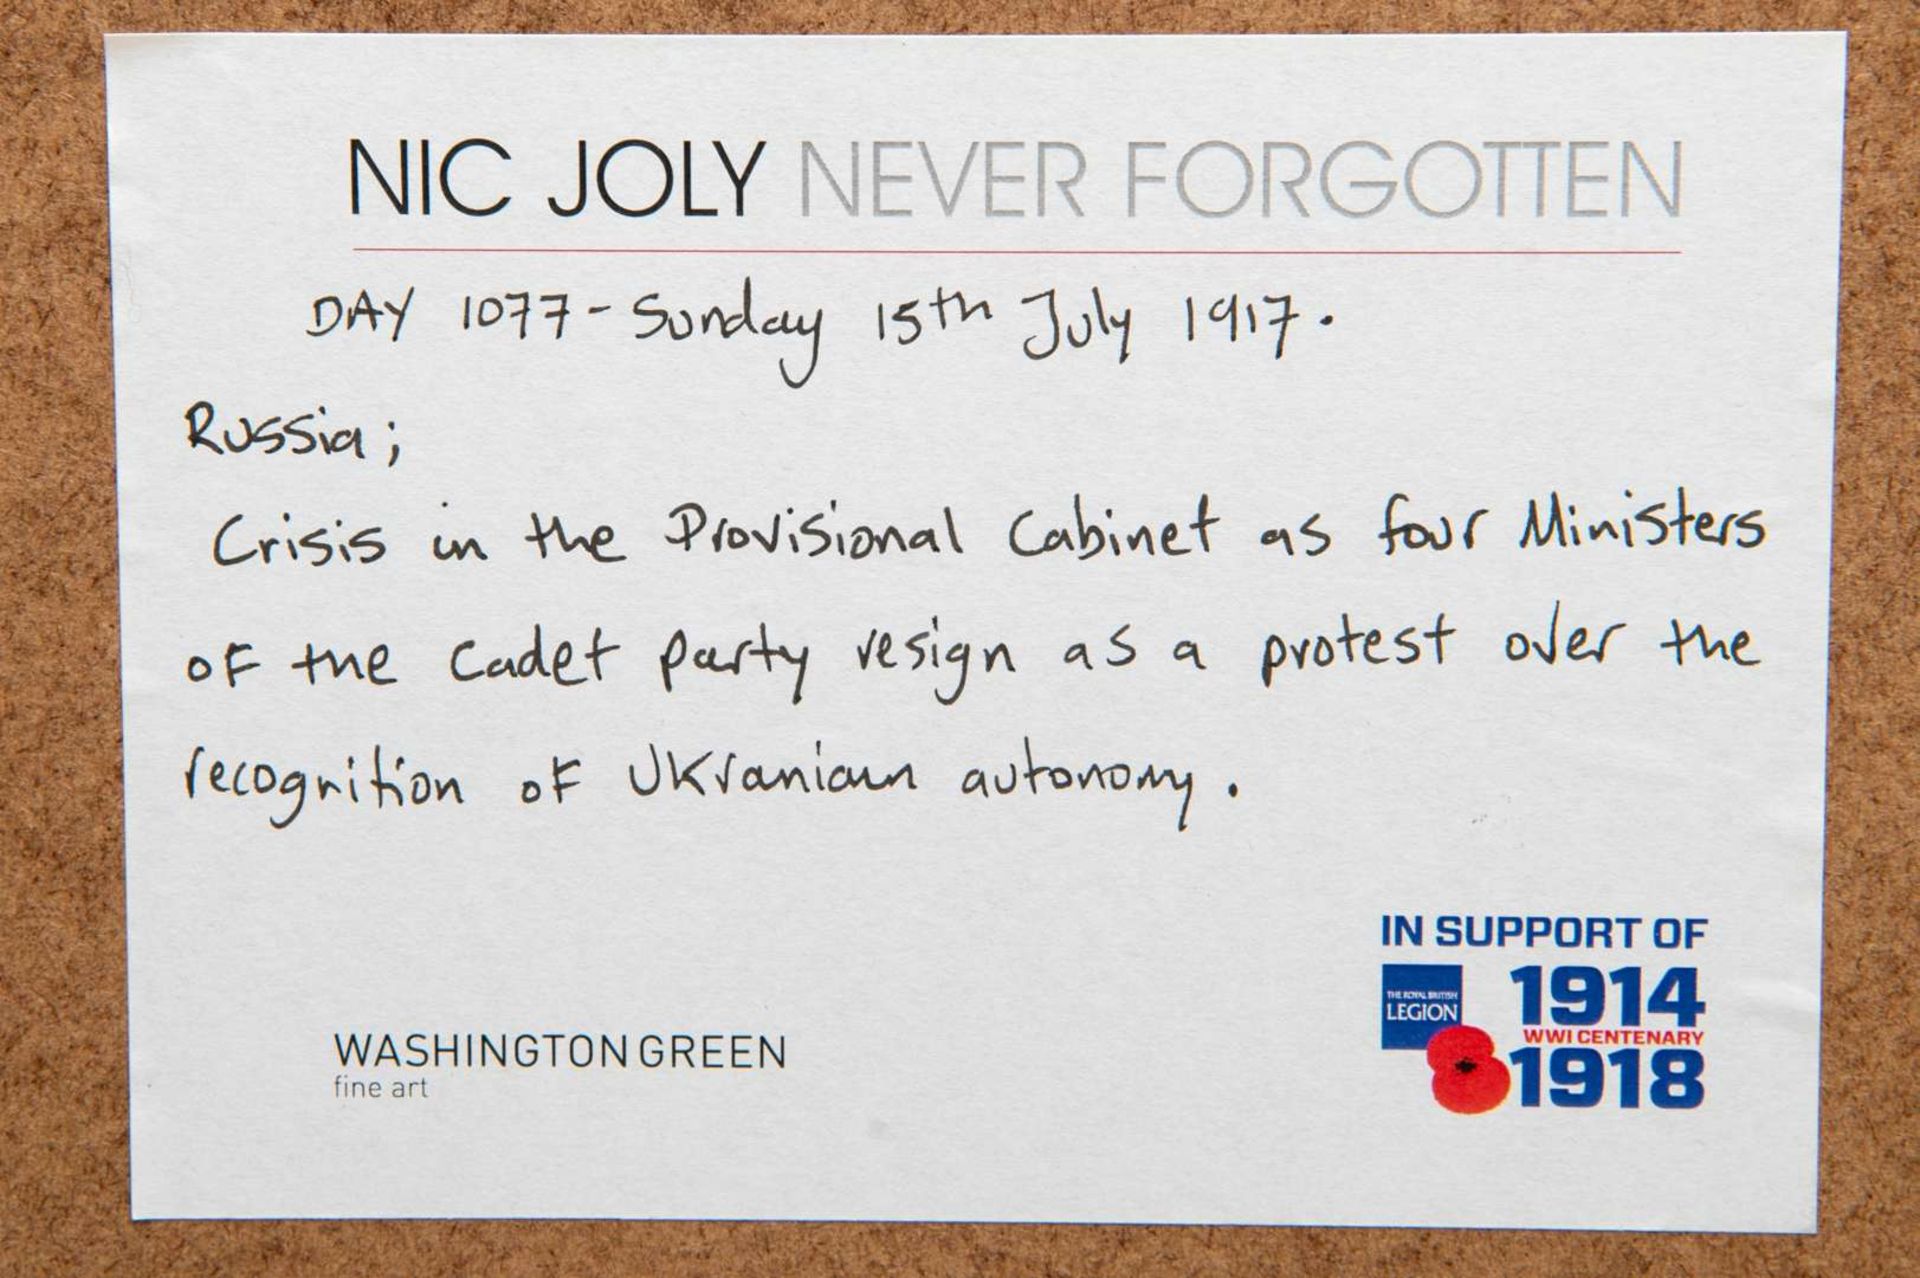 NIC JOLY, &nbsp;“NEVER FORGOTTEN, DAY 1077", mixed media. - Image 5 of 5